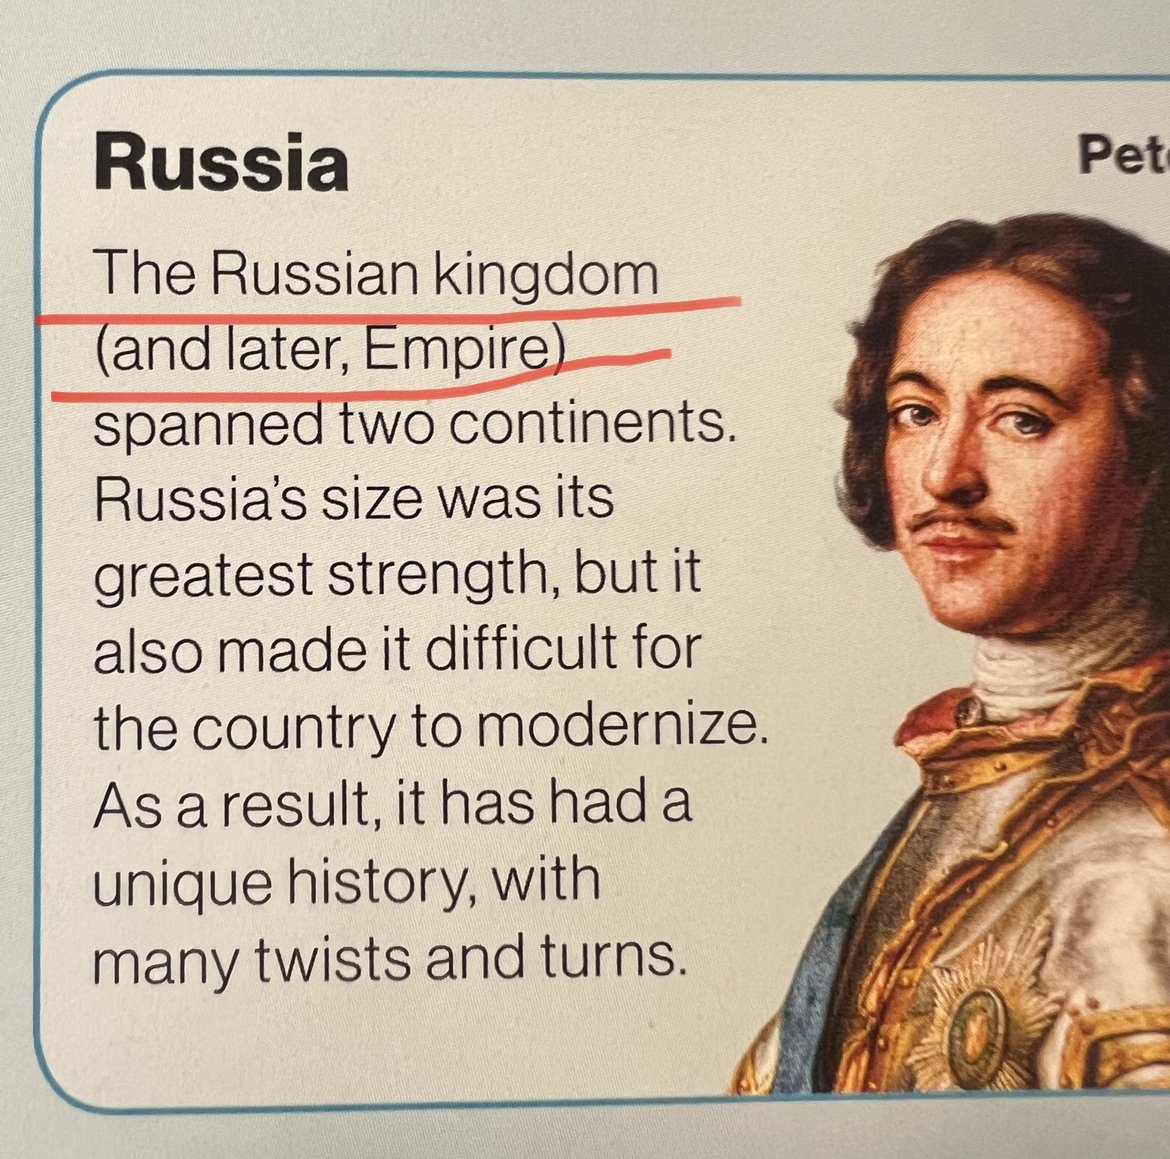 Timelines of everyone, Dorling Kindersley, 2020. Peter I is mentioned in the context of “Russian kingdom”, something that has never existed. That state was known as Muscovy and is referred as such in the various documents, Moscow newspapers and money of the time